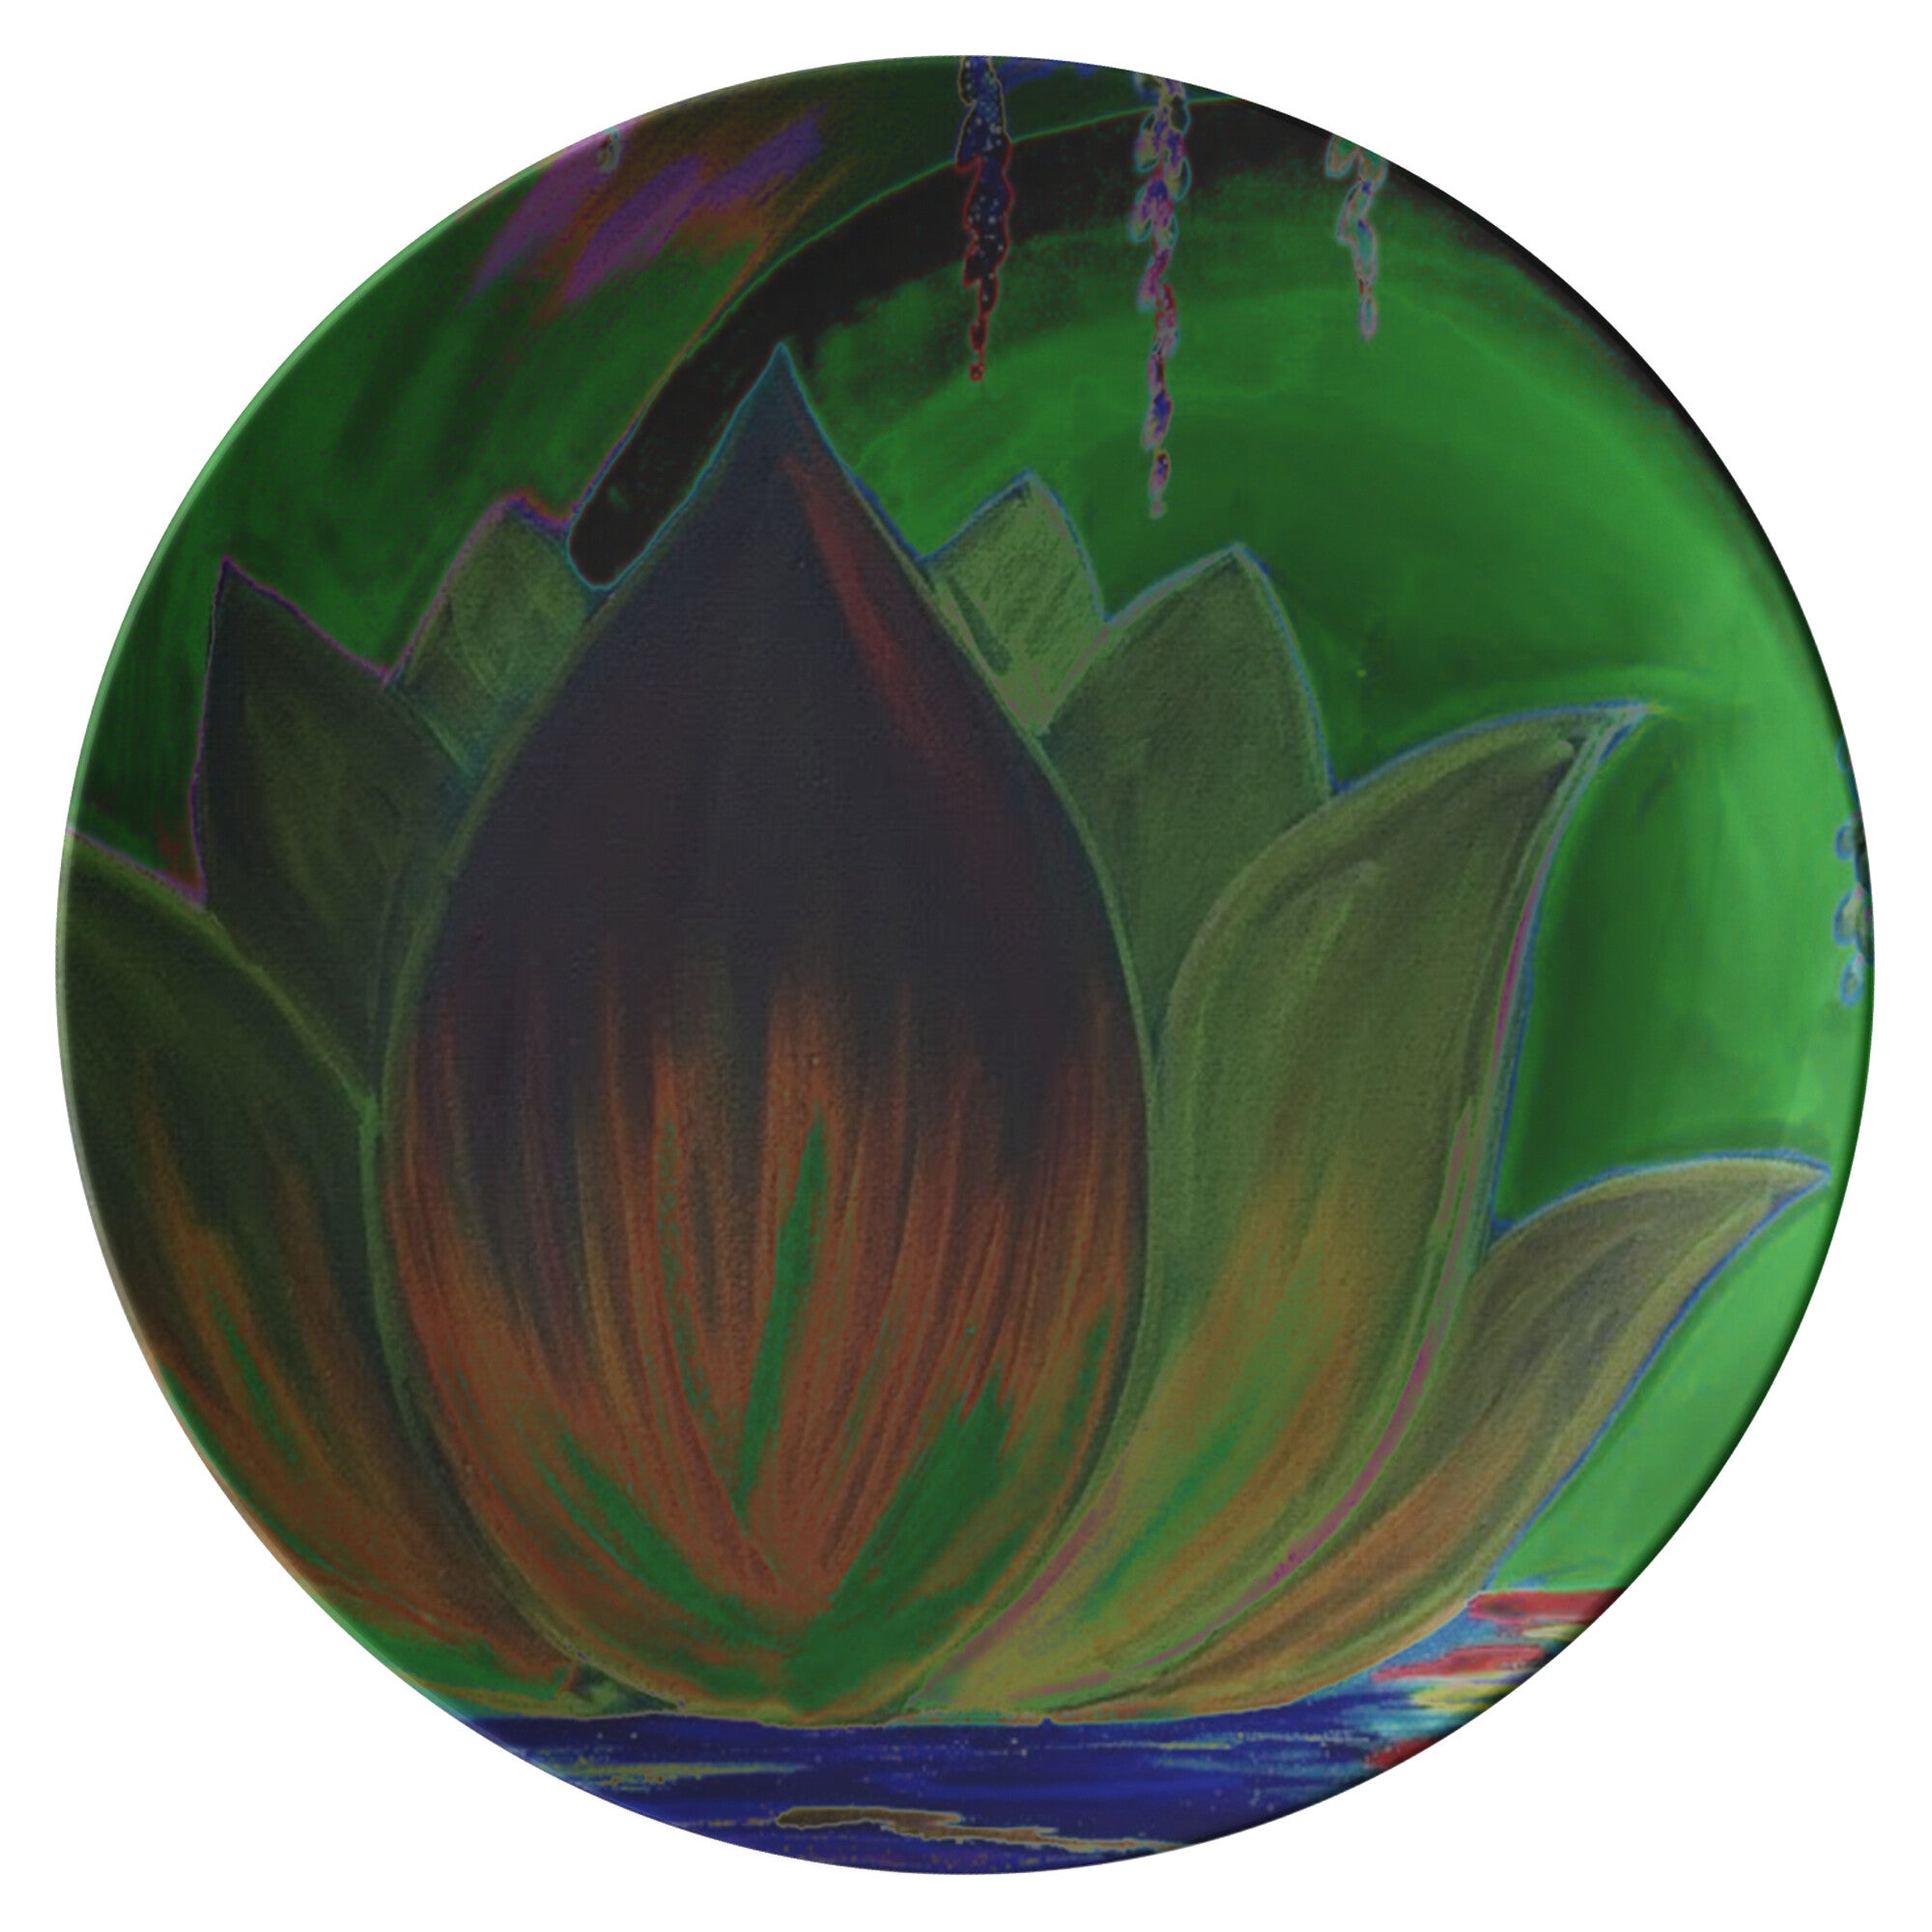 Zen Lotus Artistic Plat - Handmade Art Yoga and Meditation Products - Personal Hour